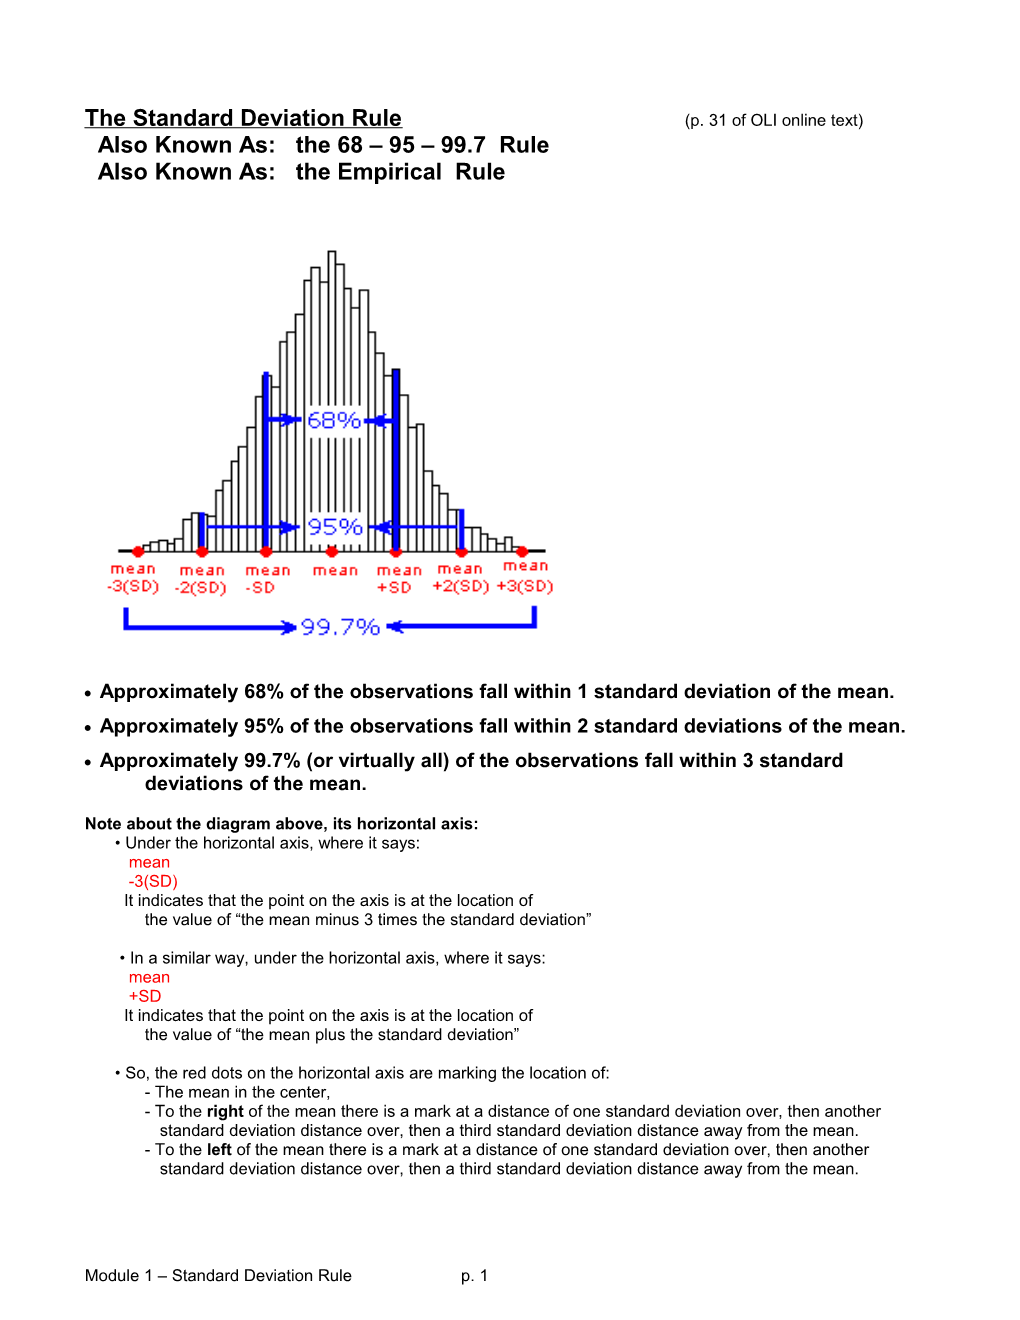 The Standard Deviation Rule (P. 31 of OLI Online Text)